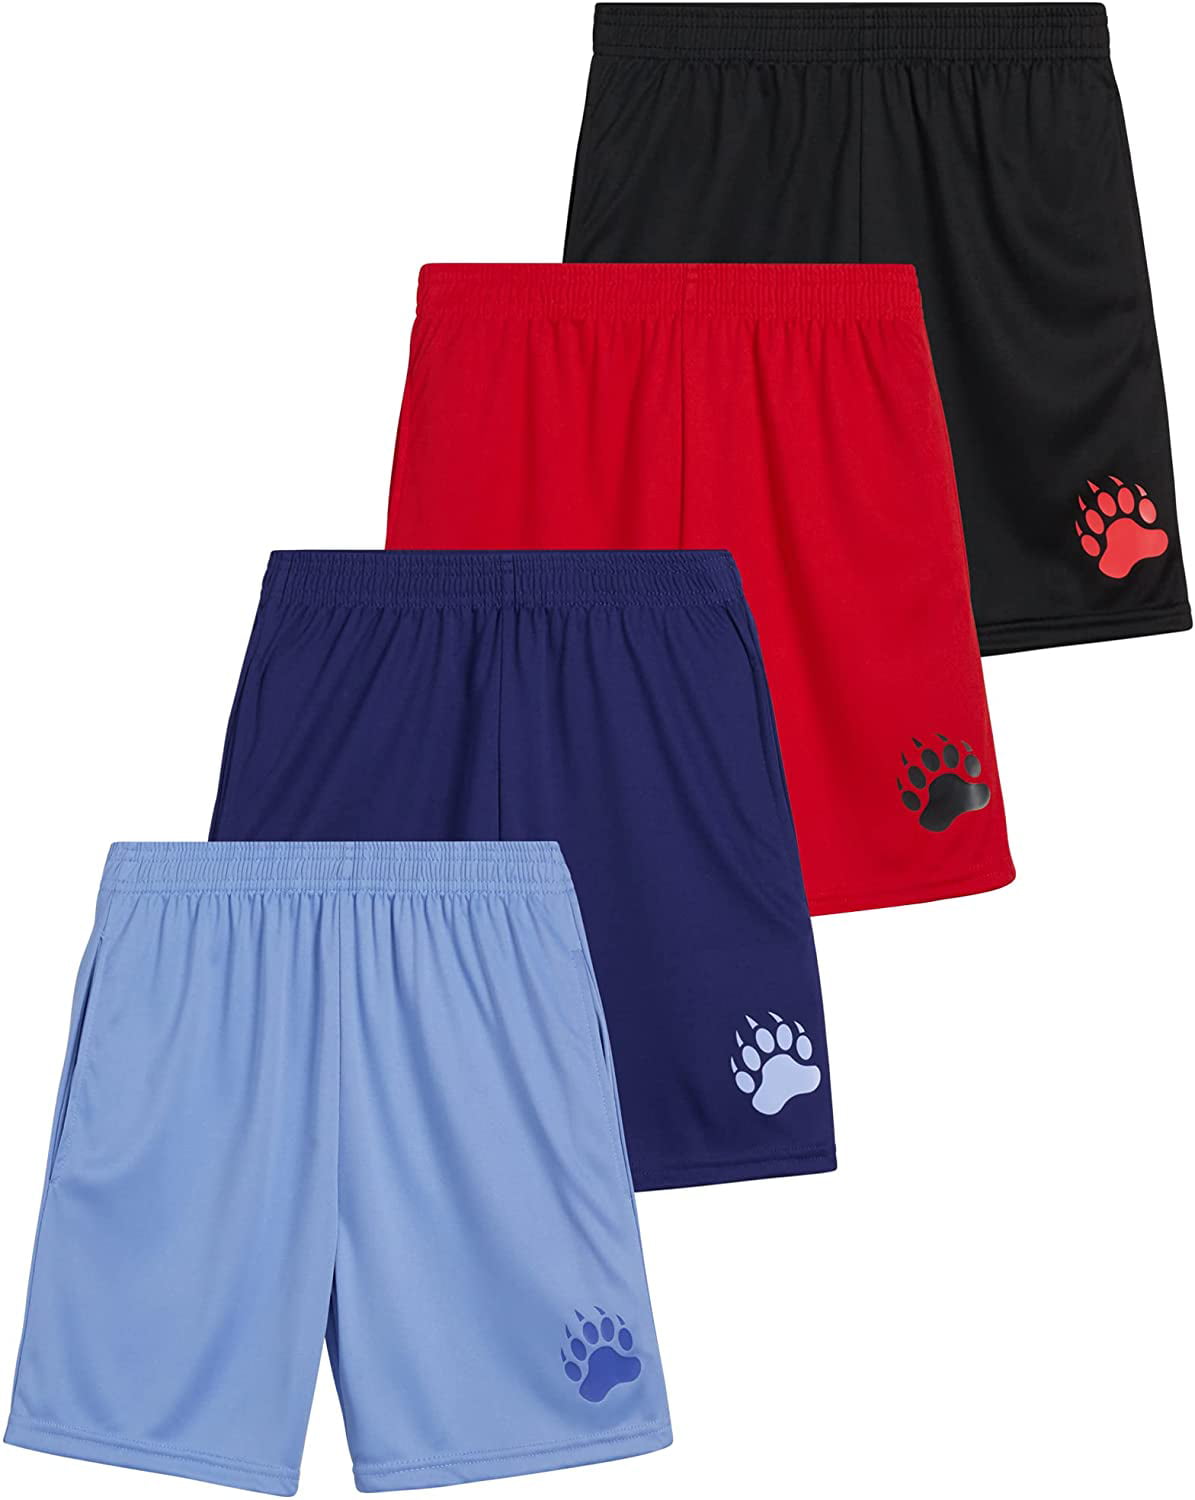 Big Boy Black Bear Boys' Active Shorts 4 Pack Performance Dry-Fit Athletic Solid Shorts 